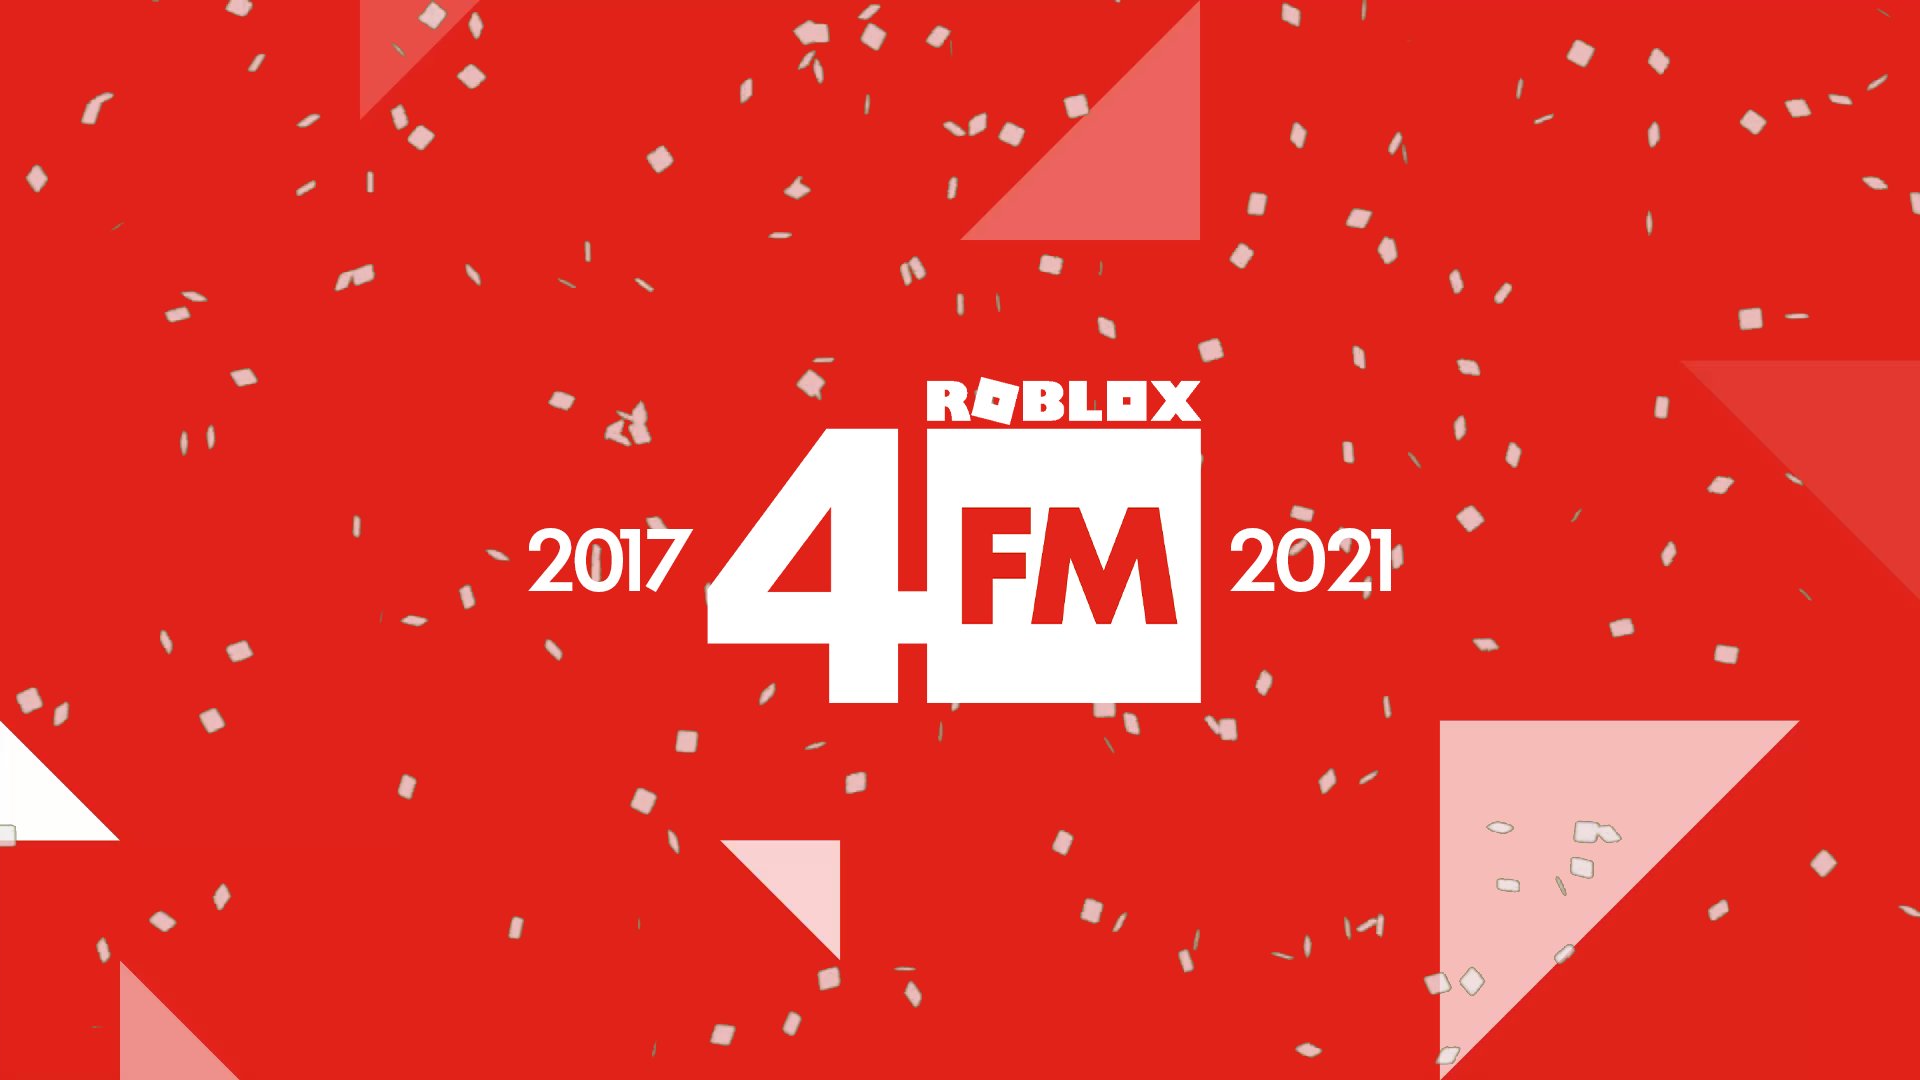 Roblox FM 📻 on X: All 23 candles for our bossman today! 🎂 From all of  us, from Roblox FM, we want wish the founder @TotalDamian_RBX a very happy  birthday. 🥳🎉 Leave